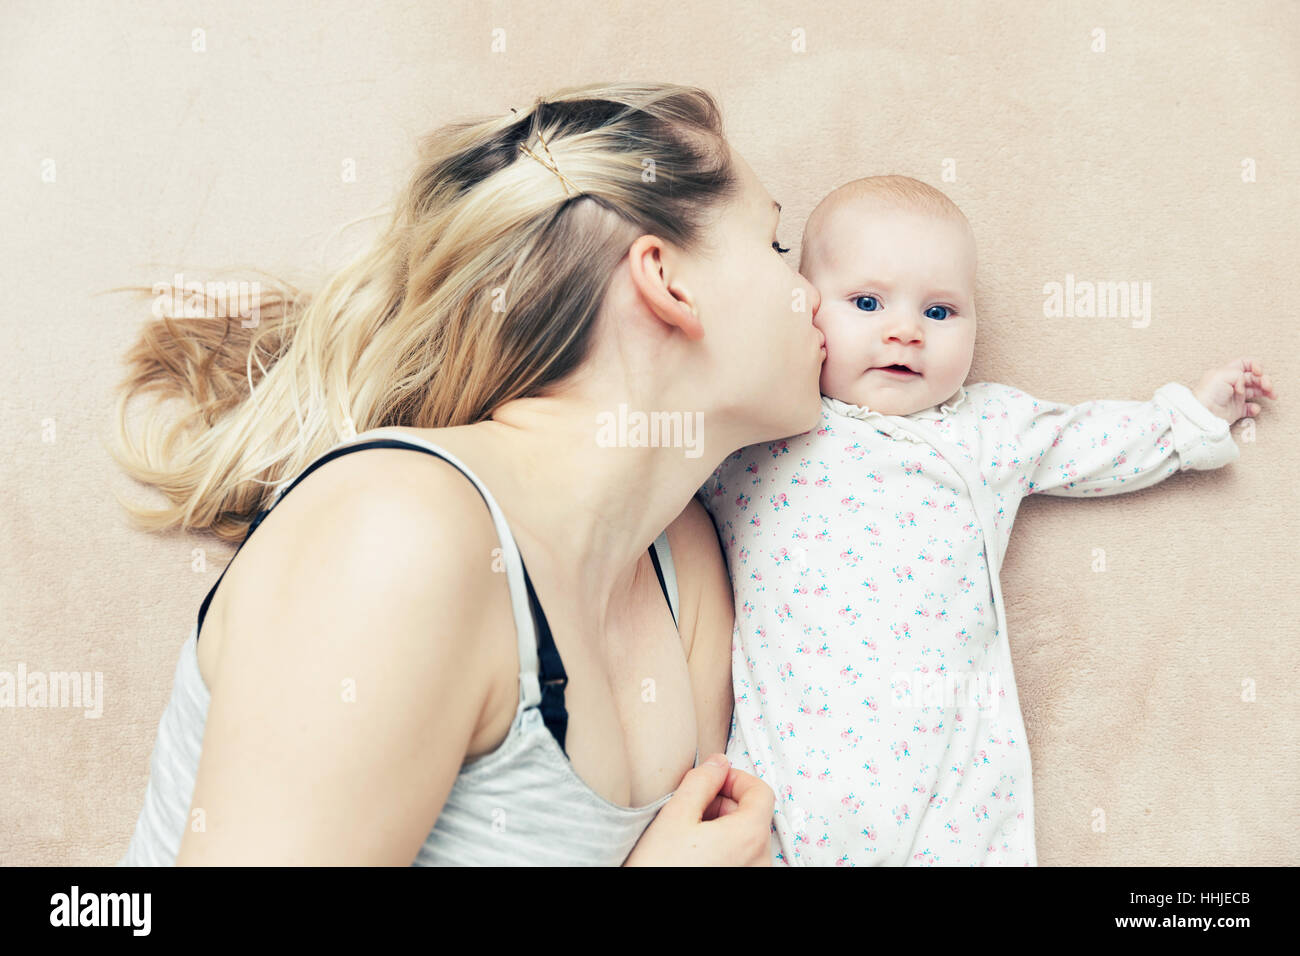 mother kissing her infant baby girl Stock Photo